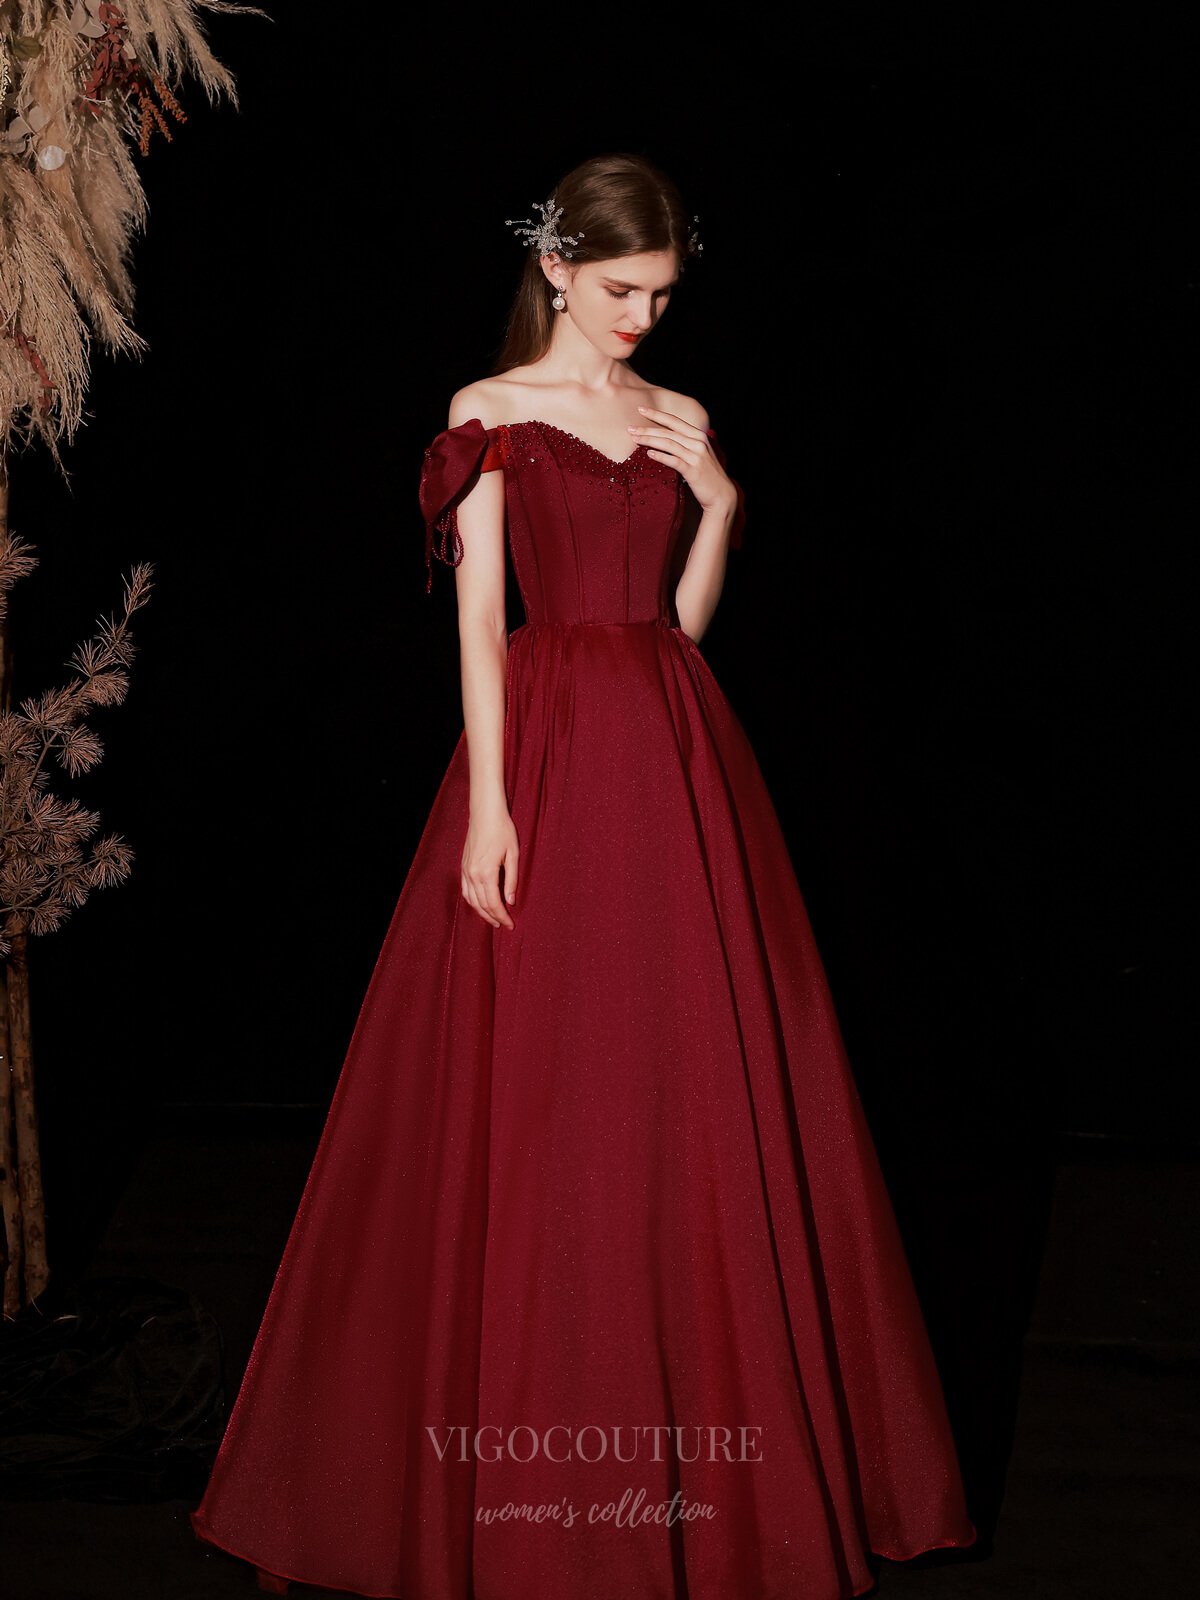 vigocouture-Burgundy Off the Shoulder Prom Dress 20736-Prom Dresses-vigocouture-Burgundy-US2-